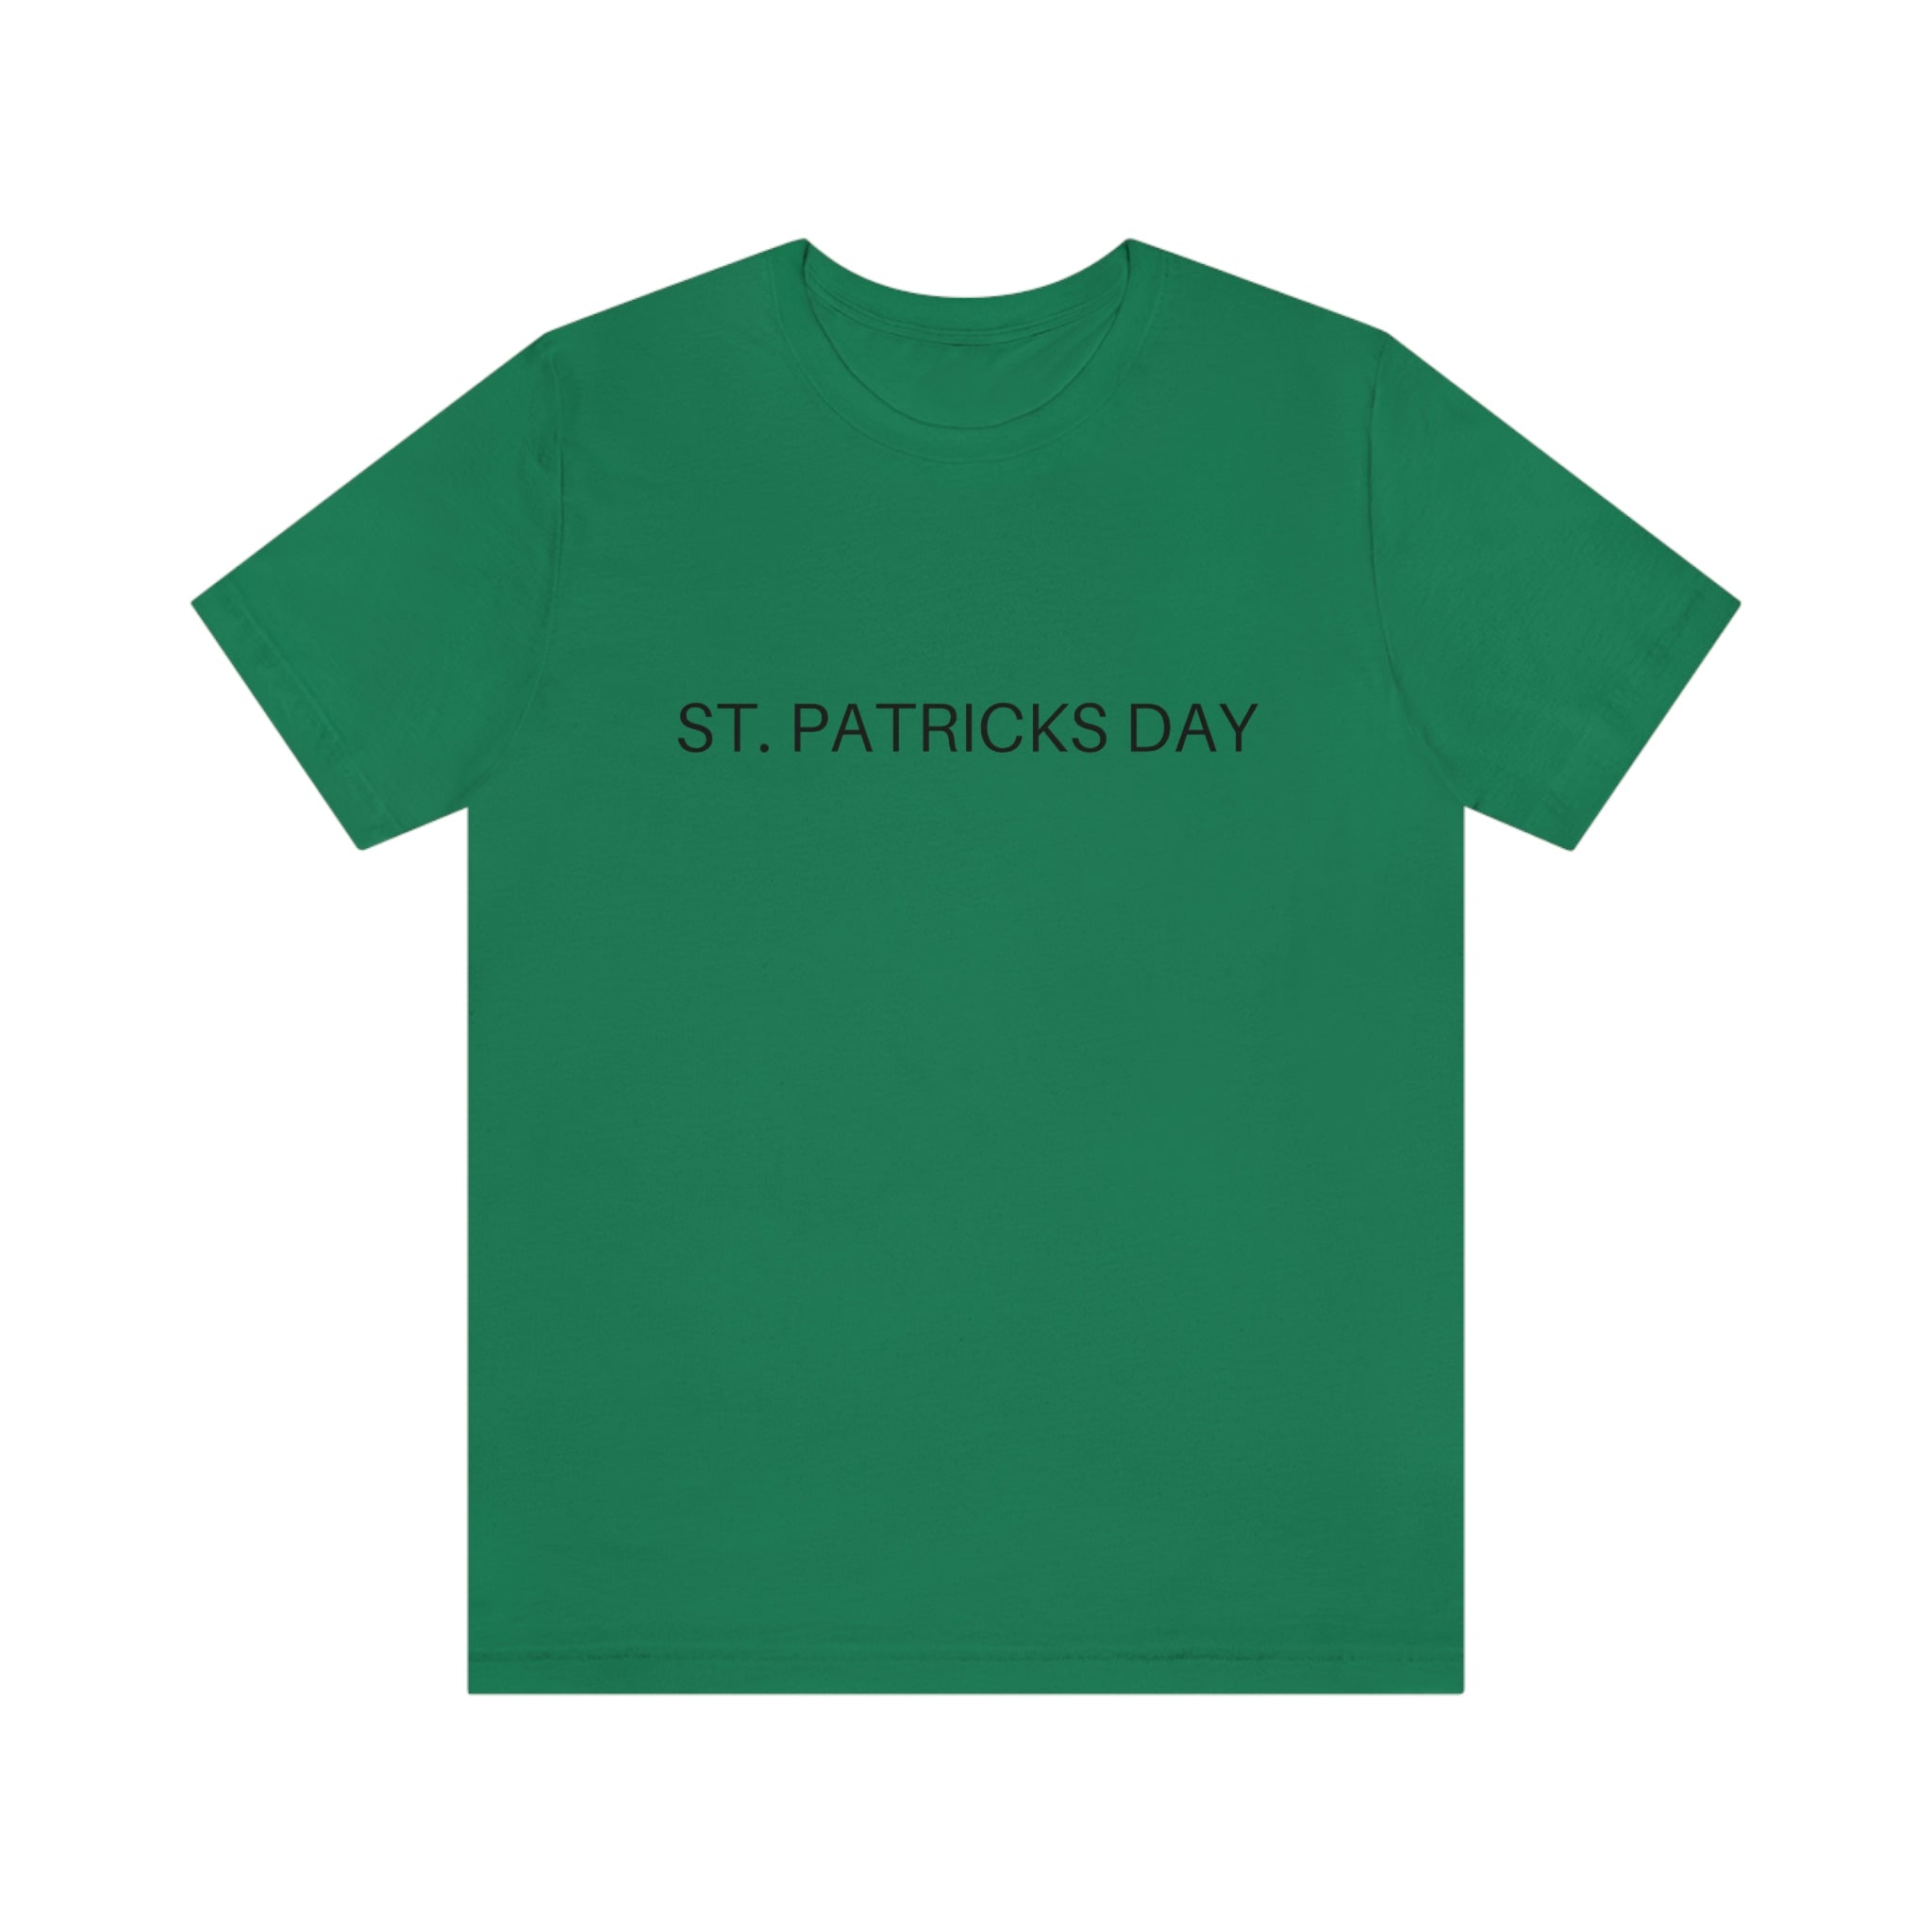 St. Patrick's Day Men's Tee, St. Patrick's Day T-shirt, St. Patrick's Day T-shirt, Unisex T-shirts, Unisex jersey short sleeve tee